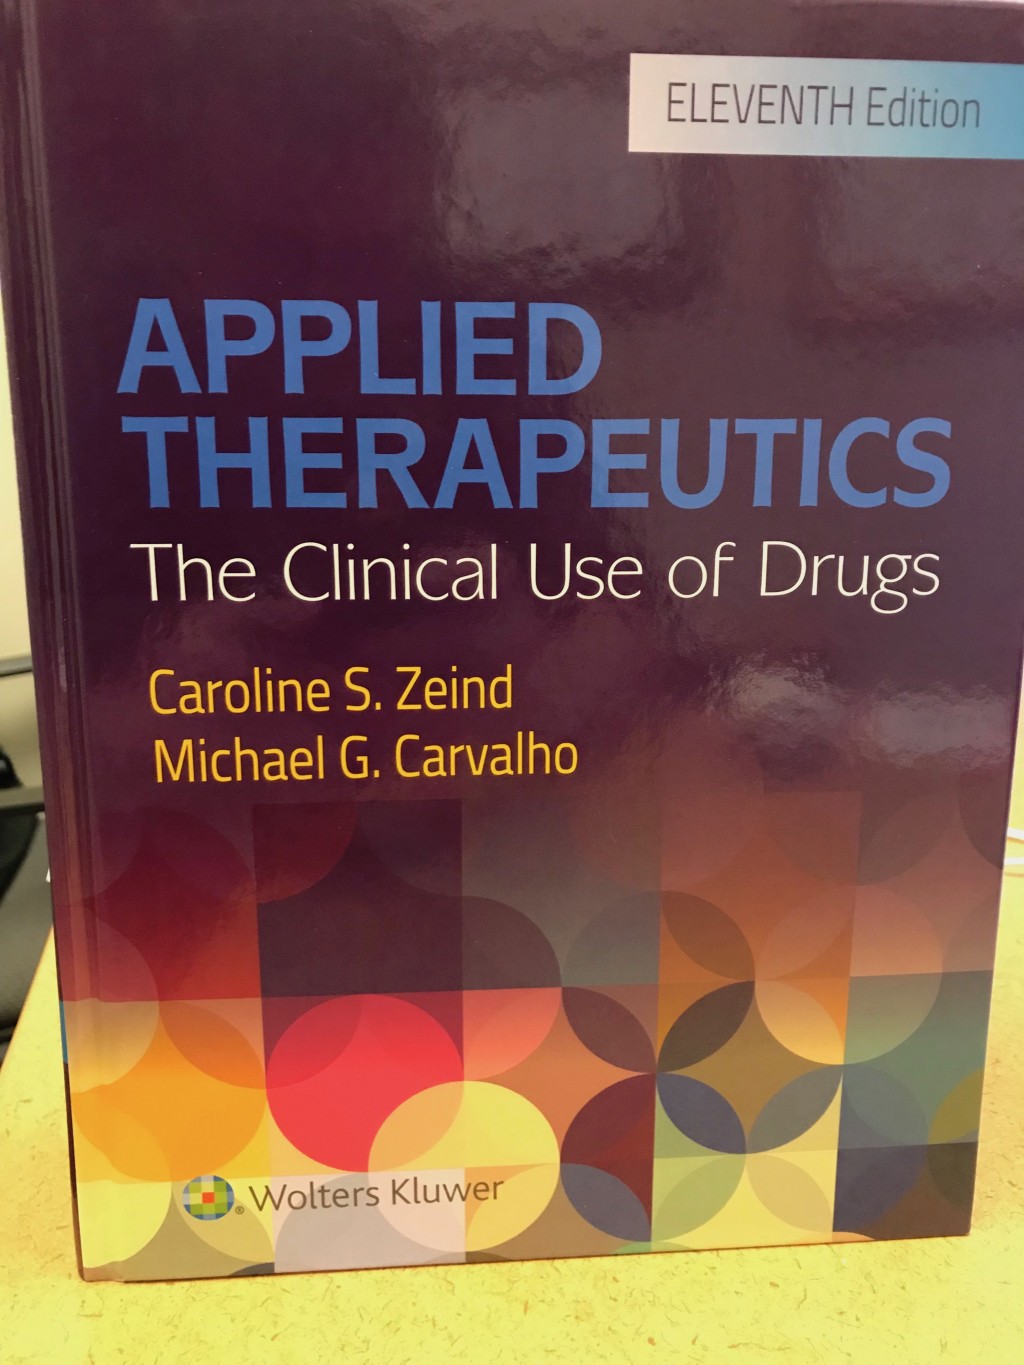 Devon Sherwood authored a chapter on the clinical use of drugs on sleep disorders